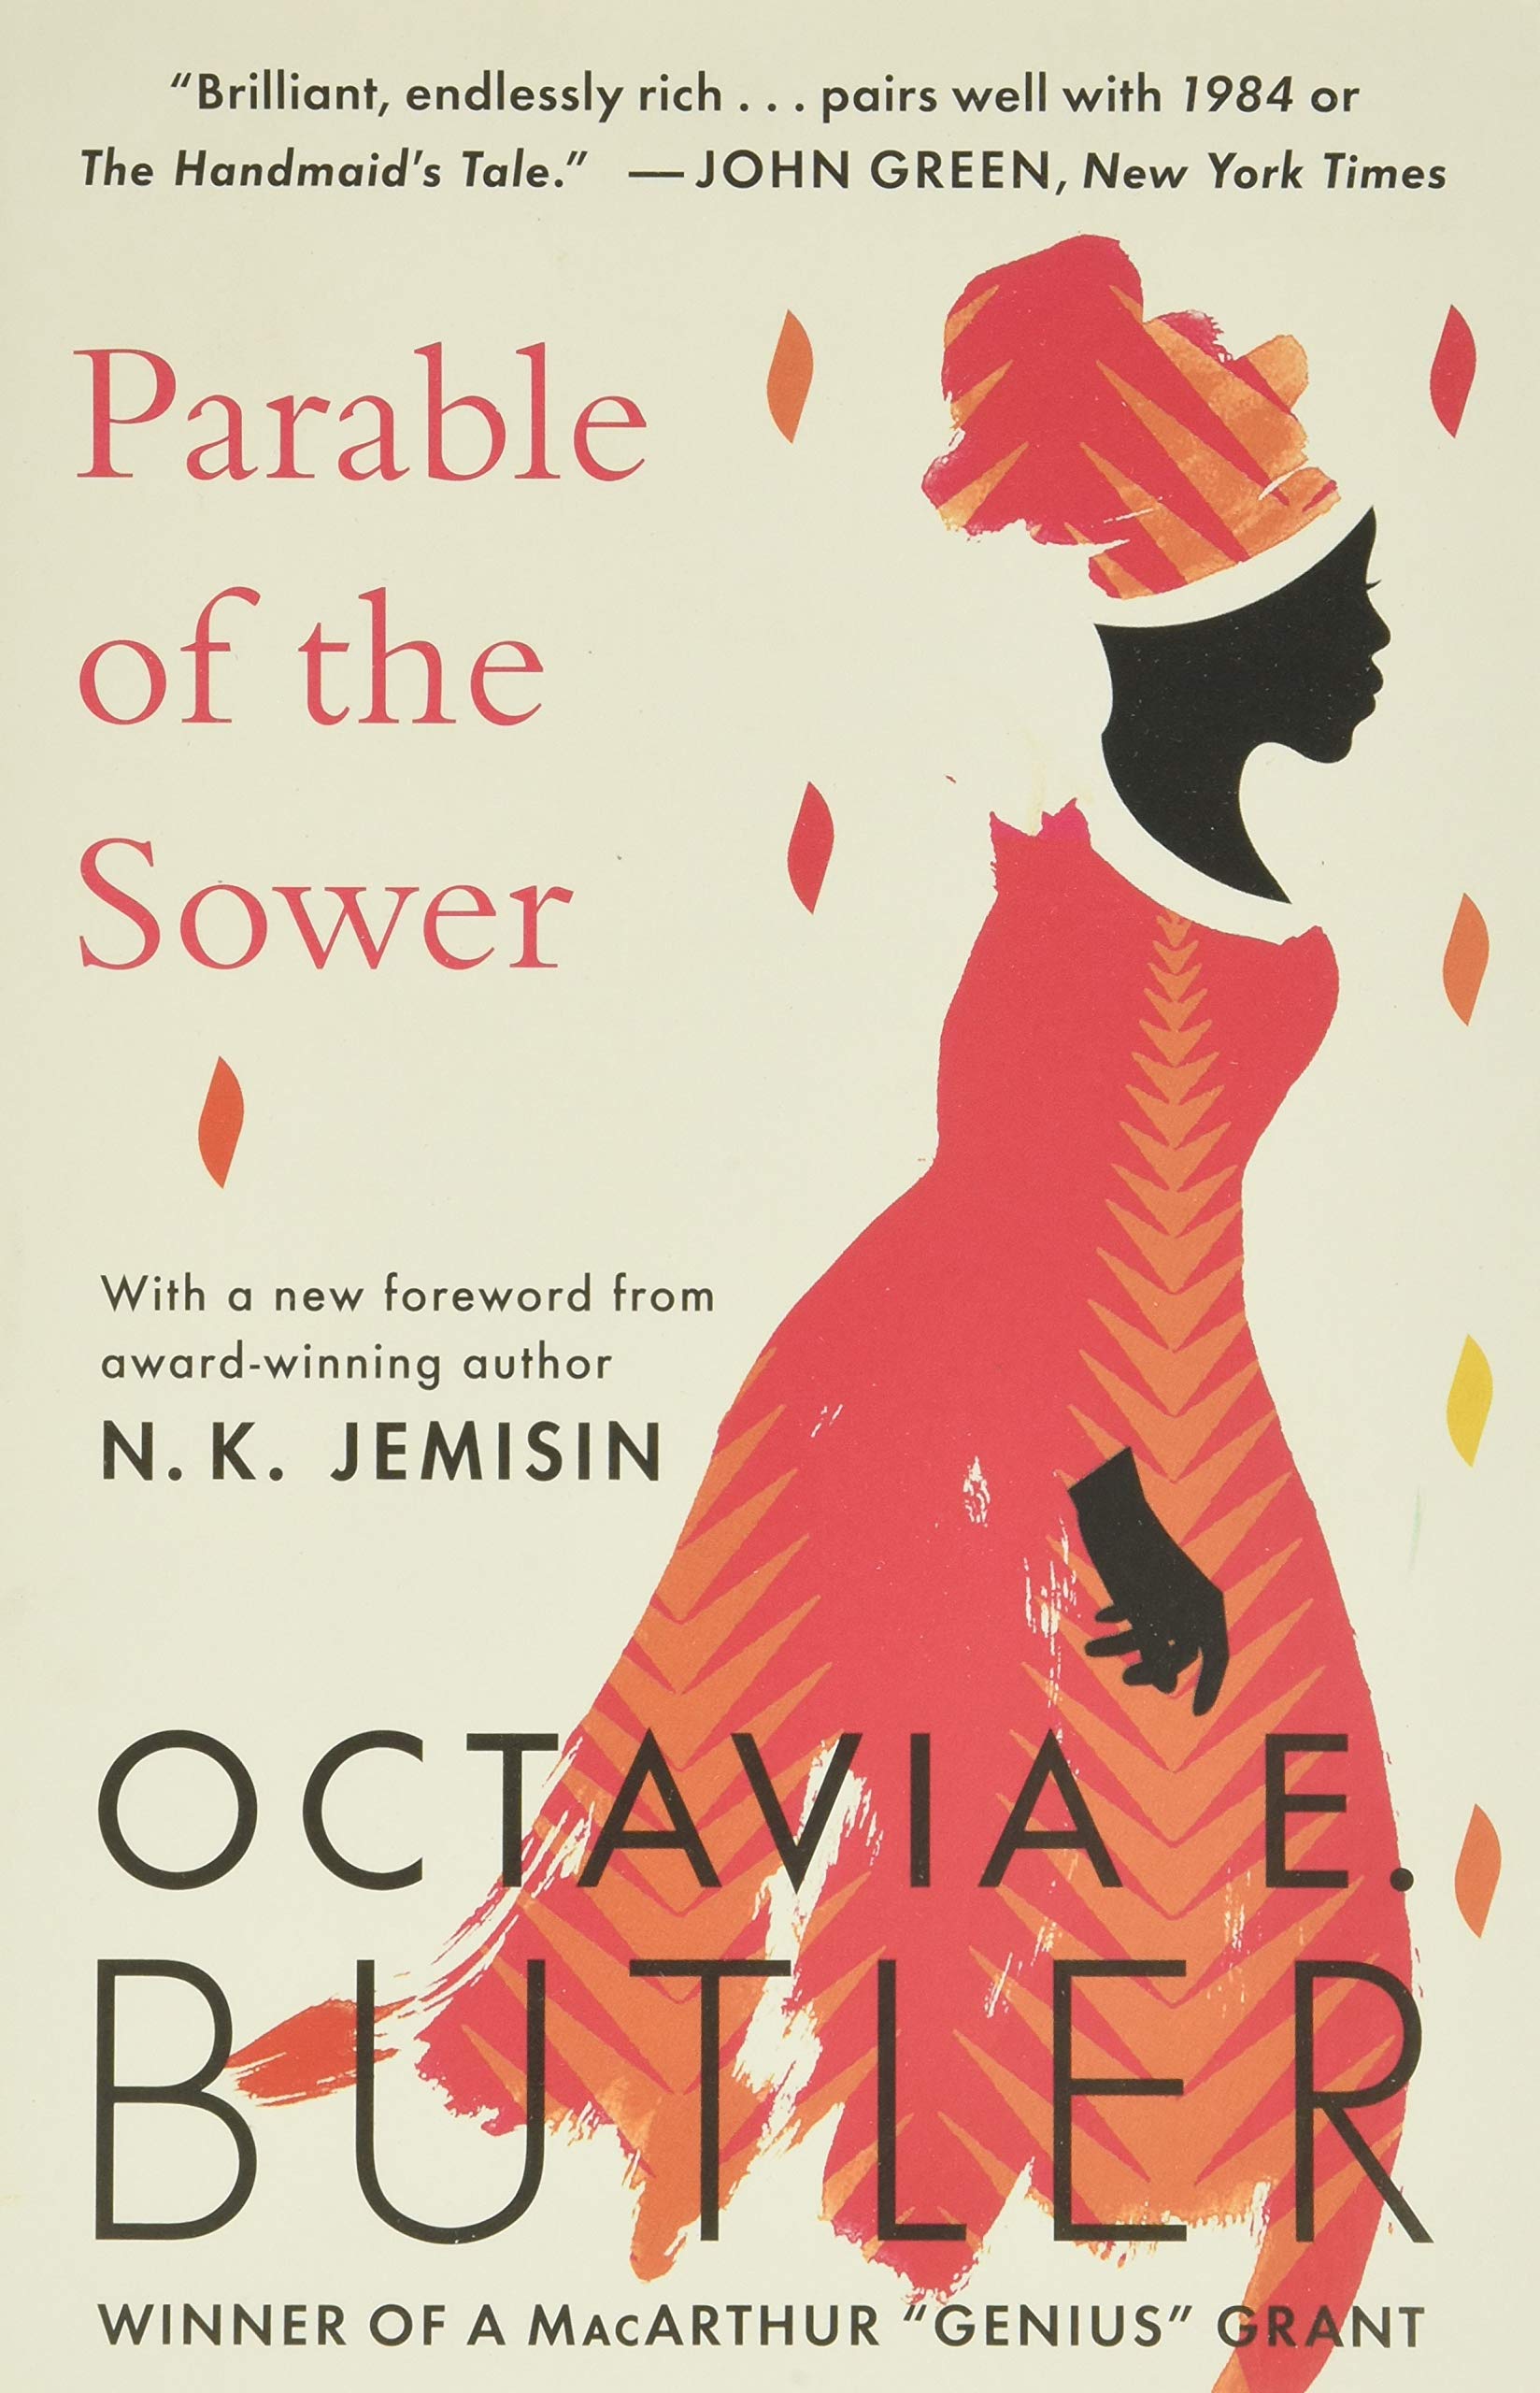 Cover image of Octavia Butler's "Parable of the Sower"